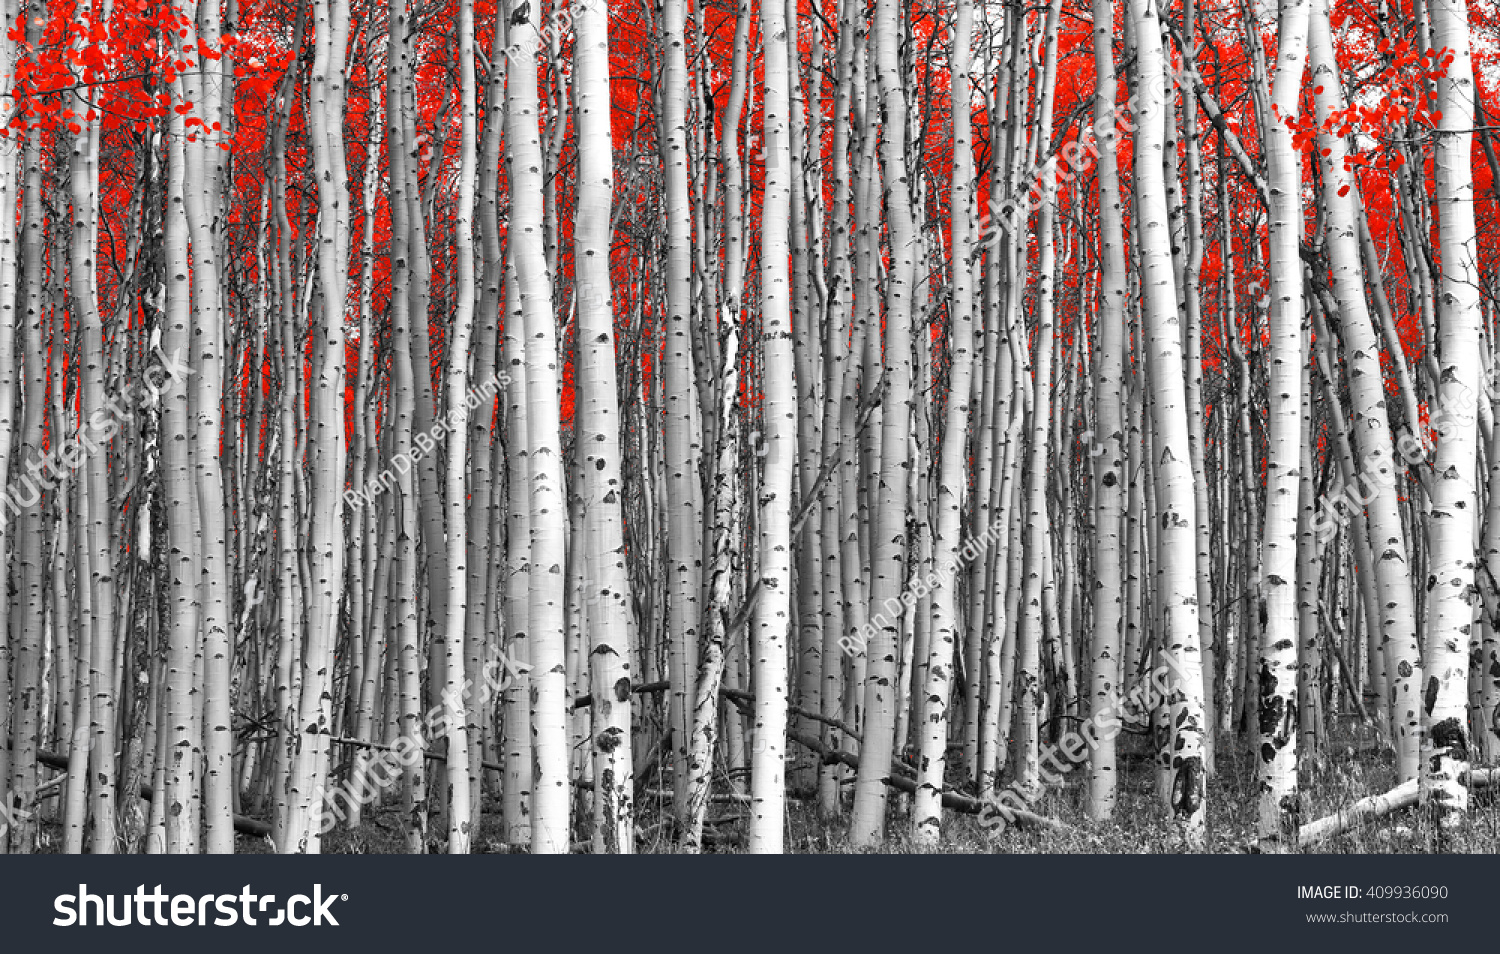 Red leaves in a black and white forest landscape #409936090